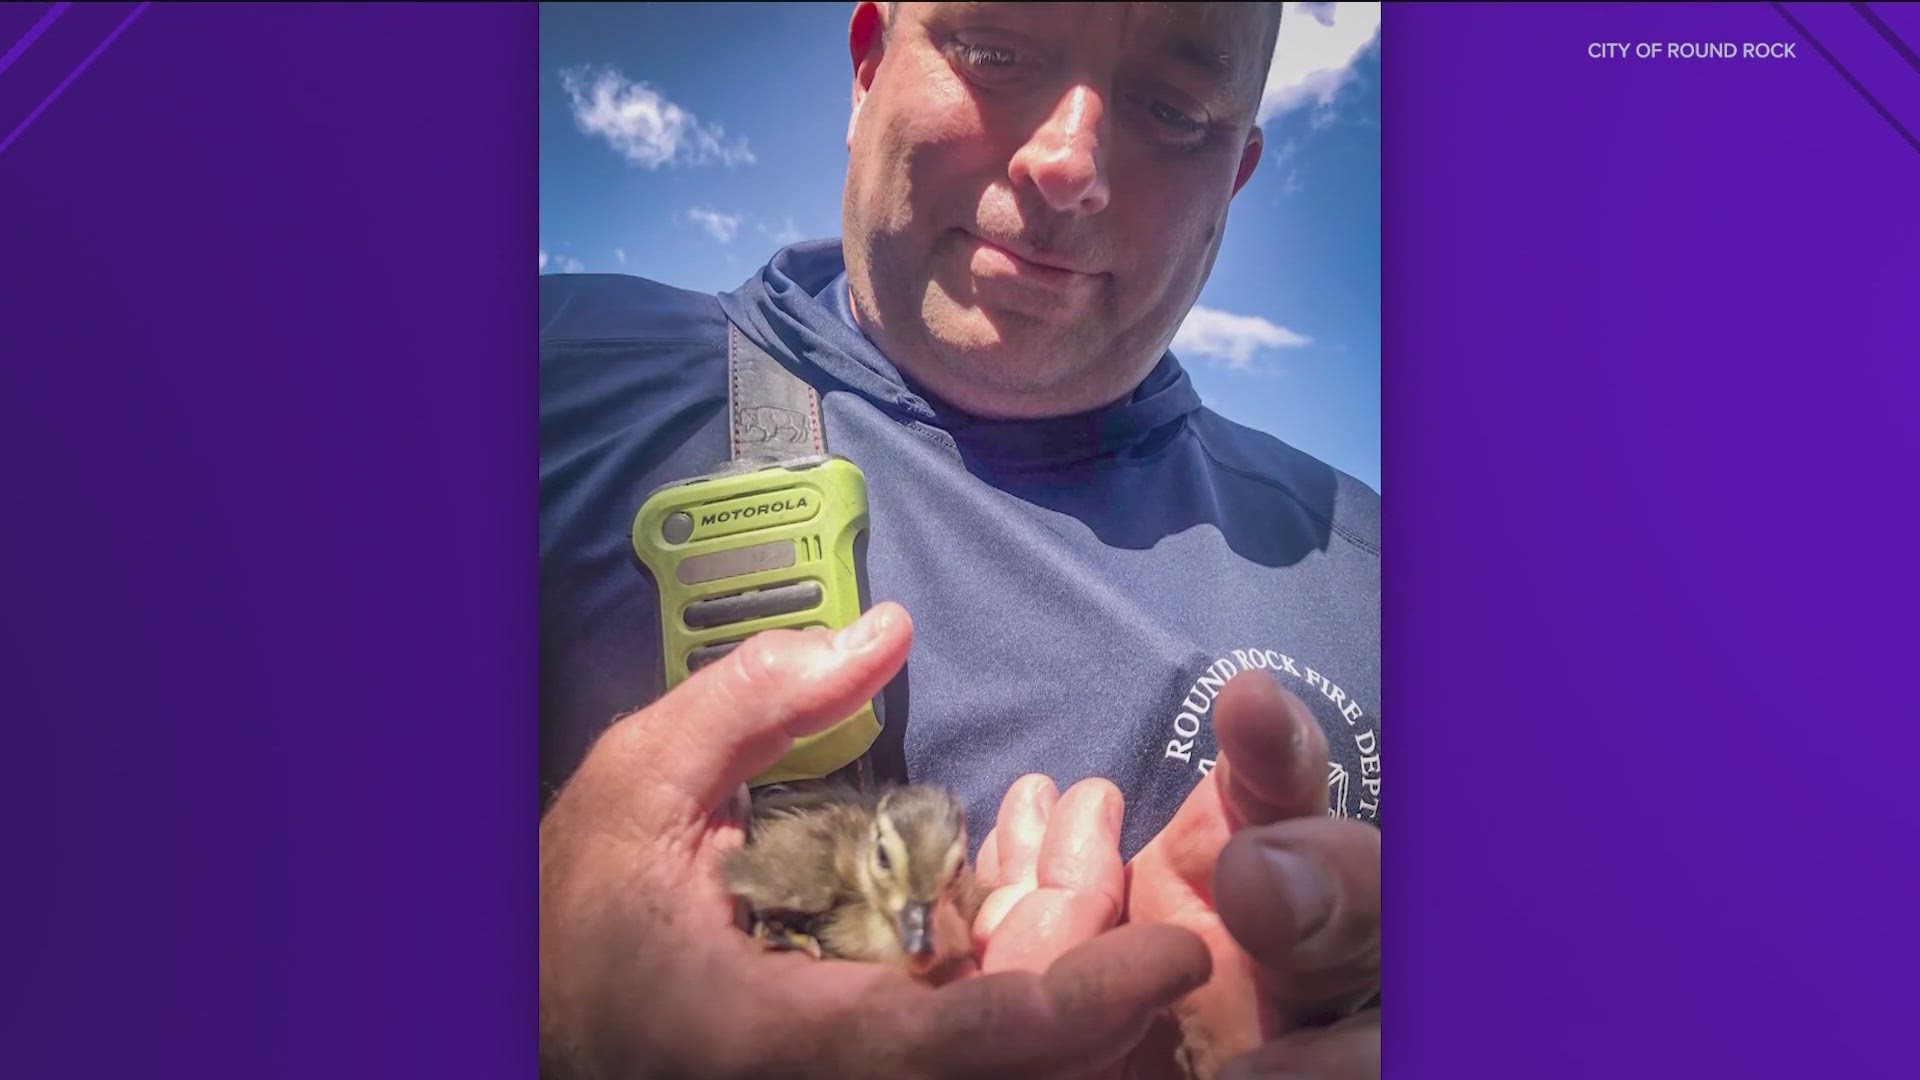 Round Rock firefighters rescued 11 ducklings who were washed into a storm drain due to recent rainfall.